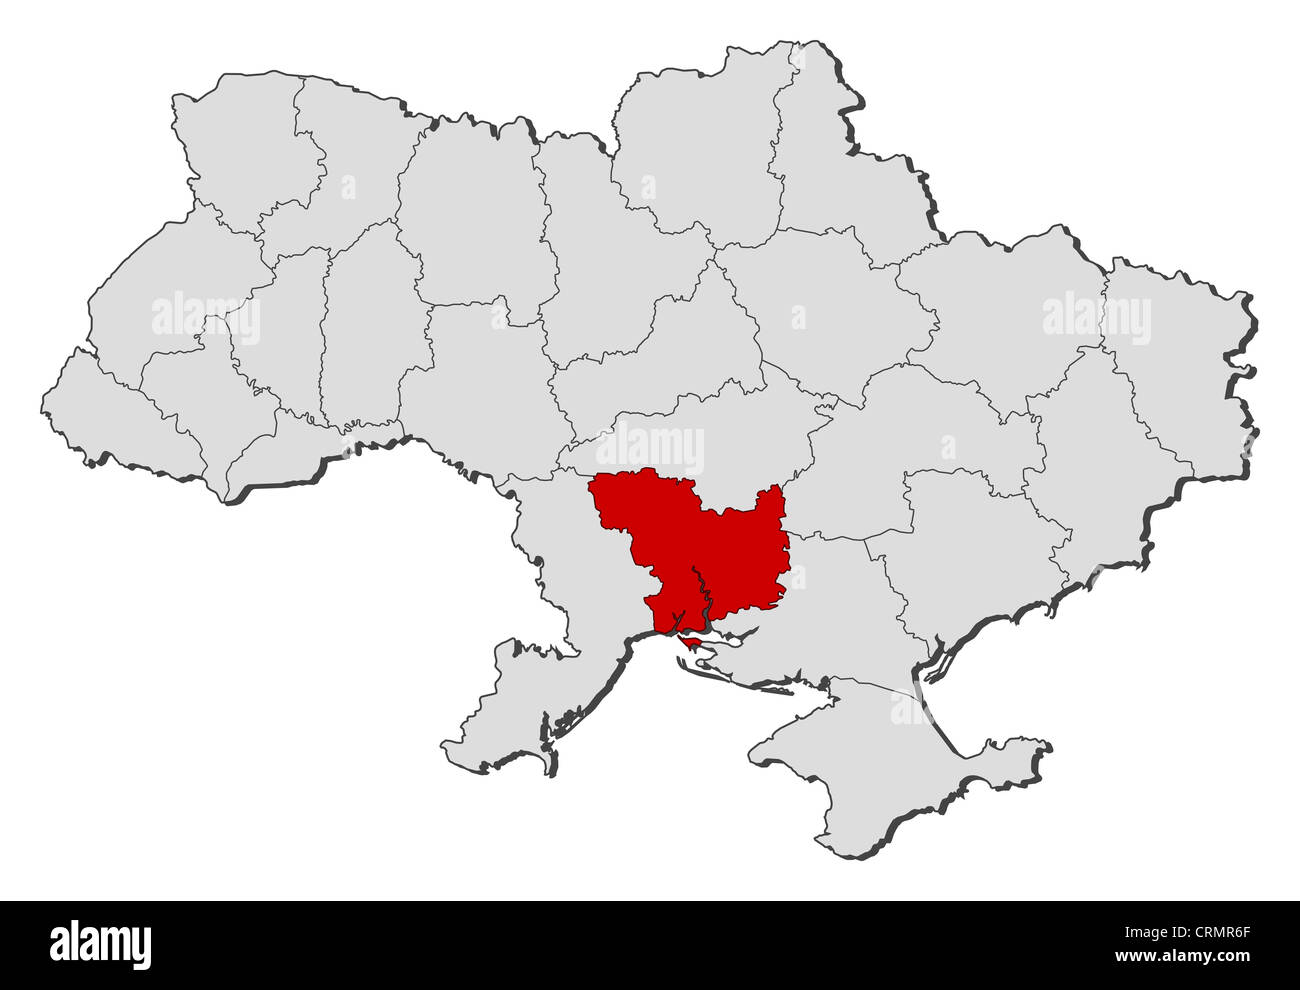 Political map of Ukraine with the several oblasts where Mykolaiv is highlighted. Stock Photo